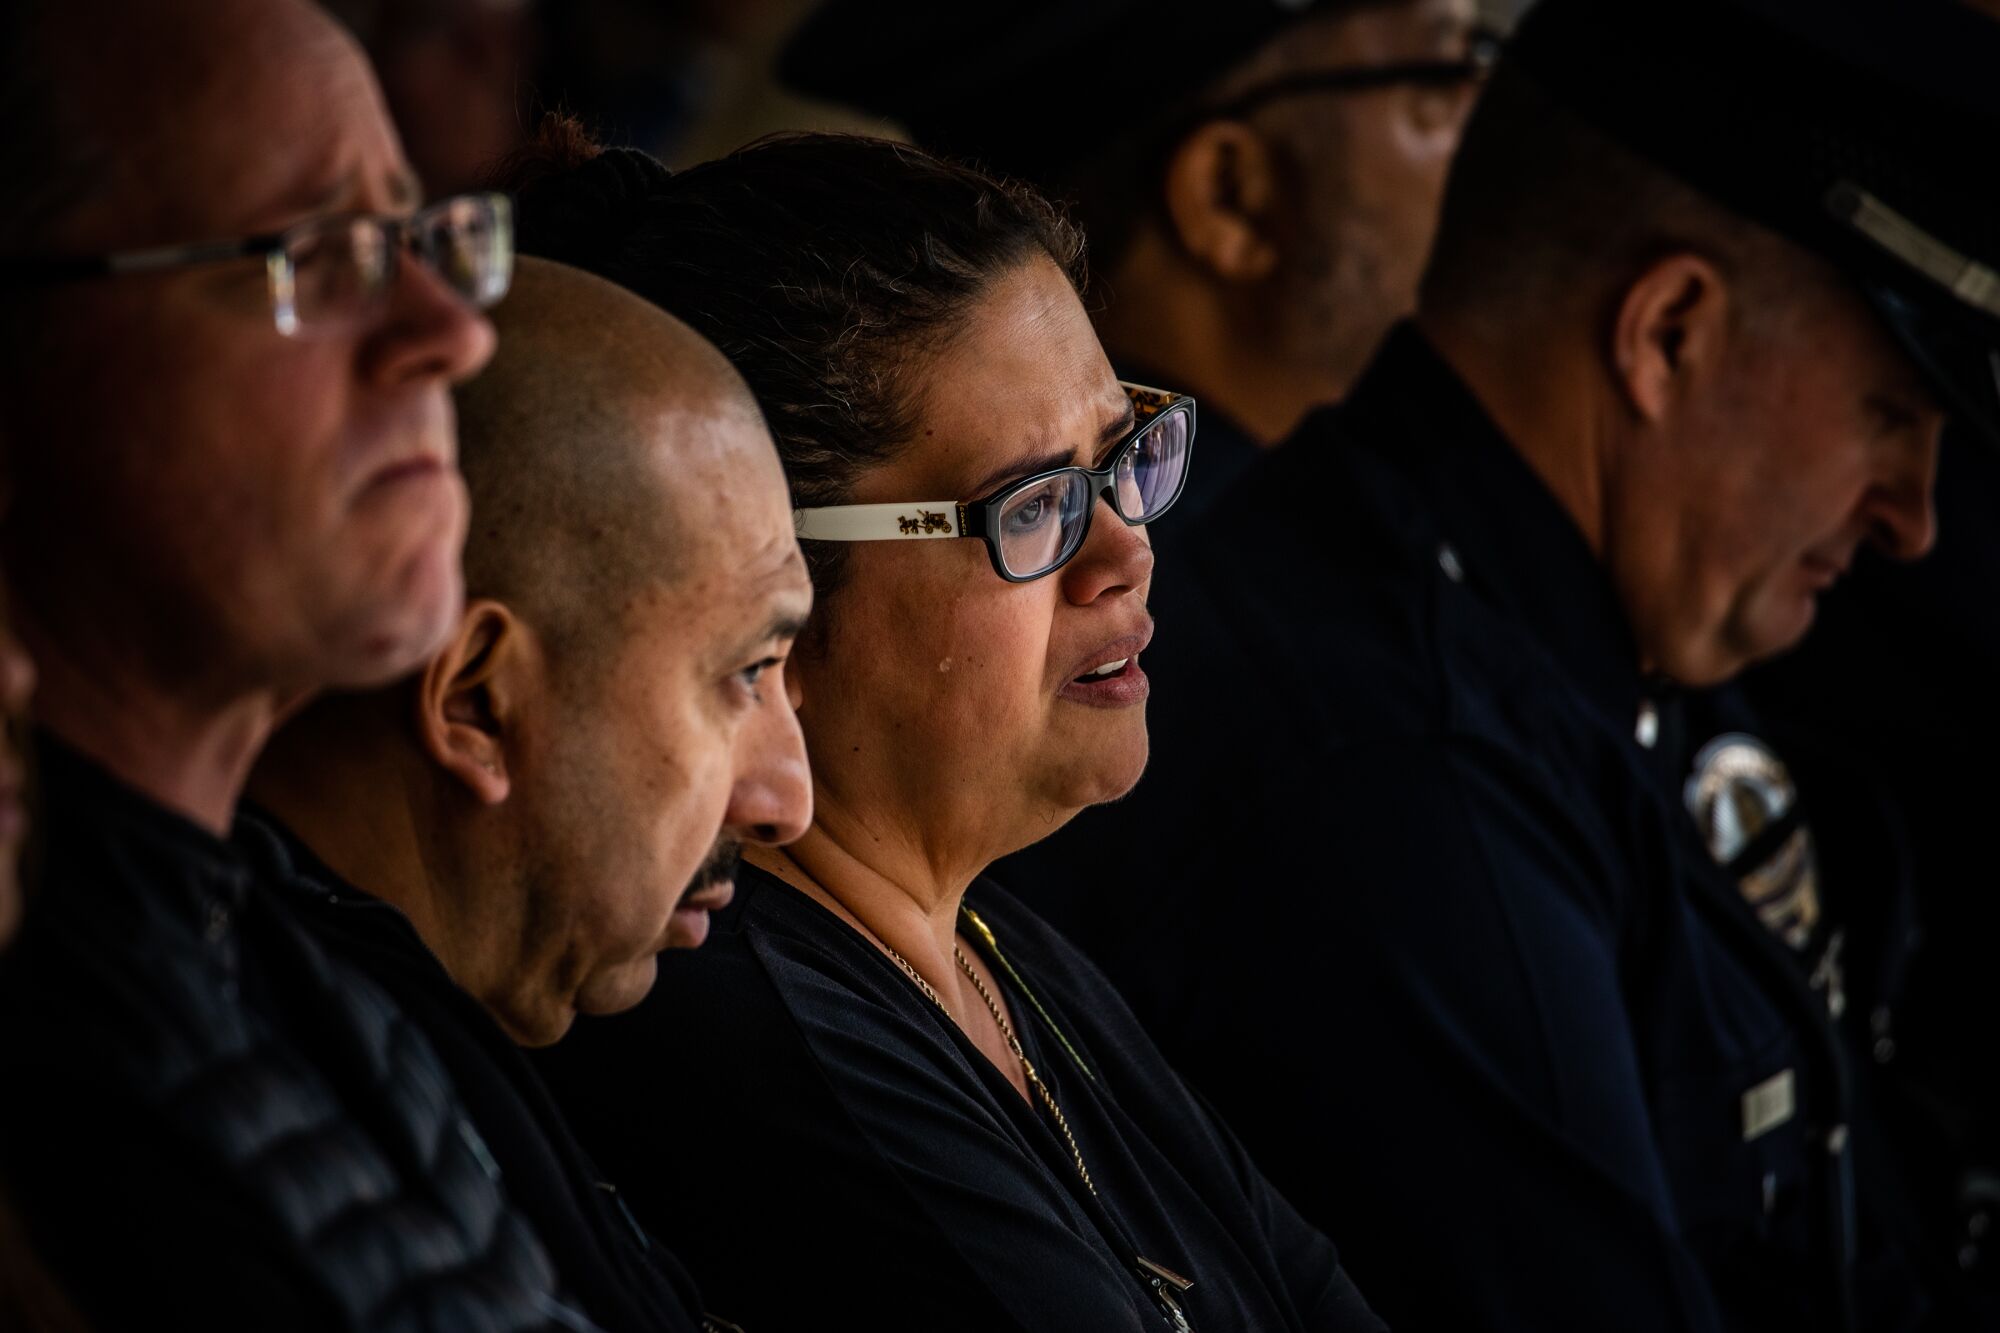 A woman cries while sitting in a row of seats;  all dressed in black.